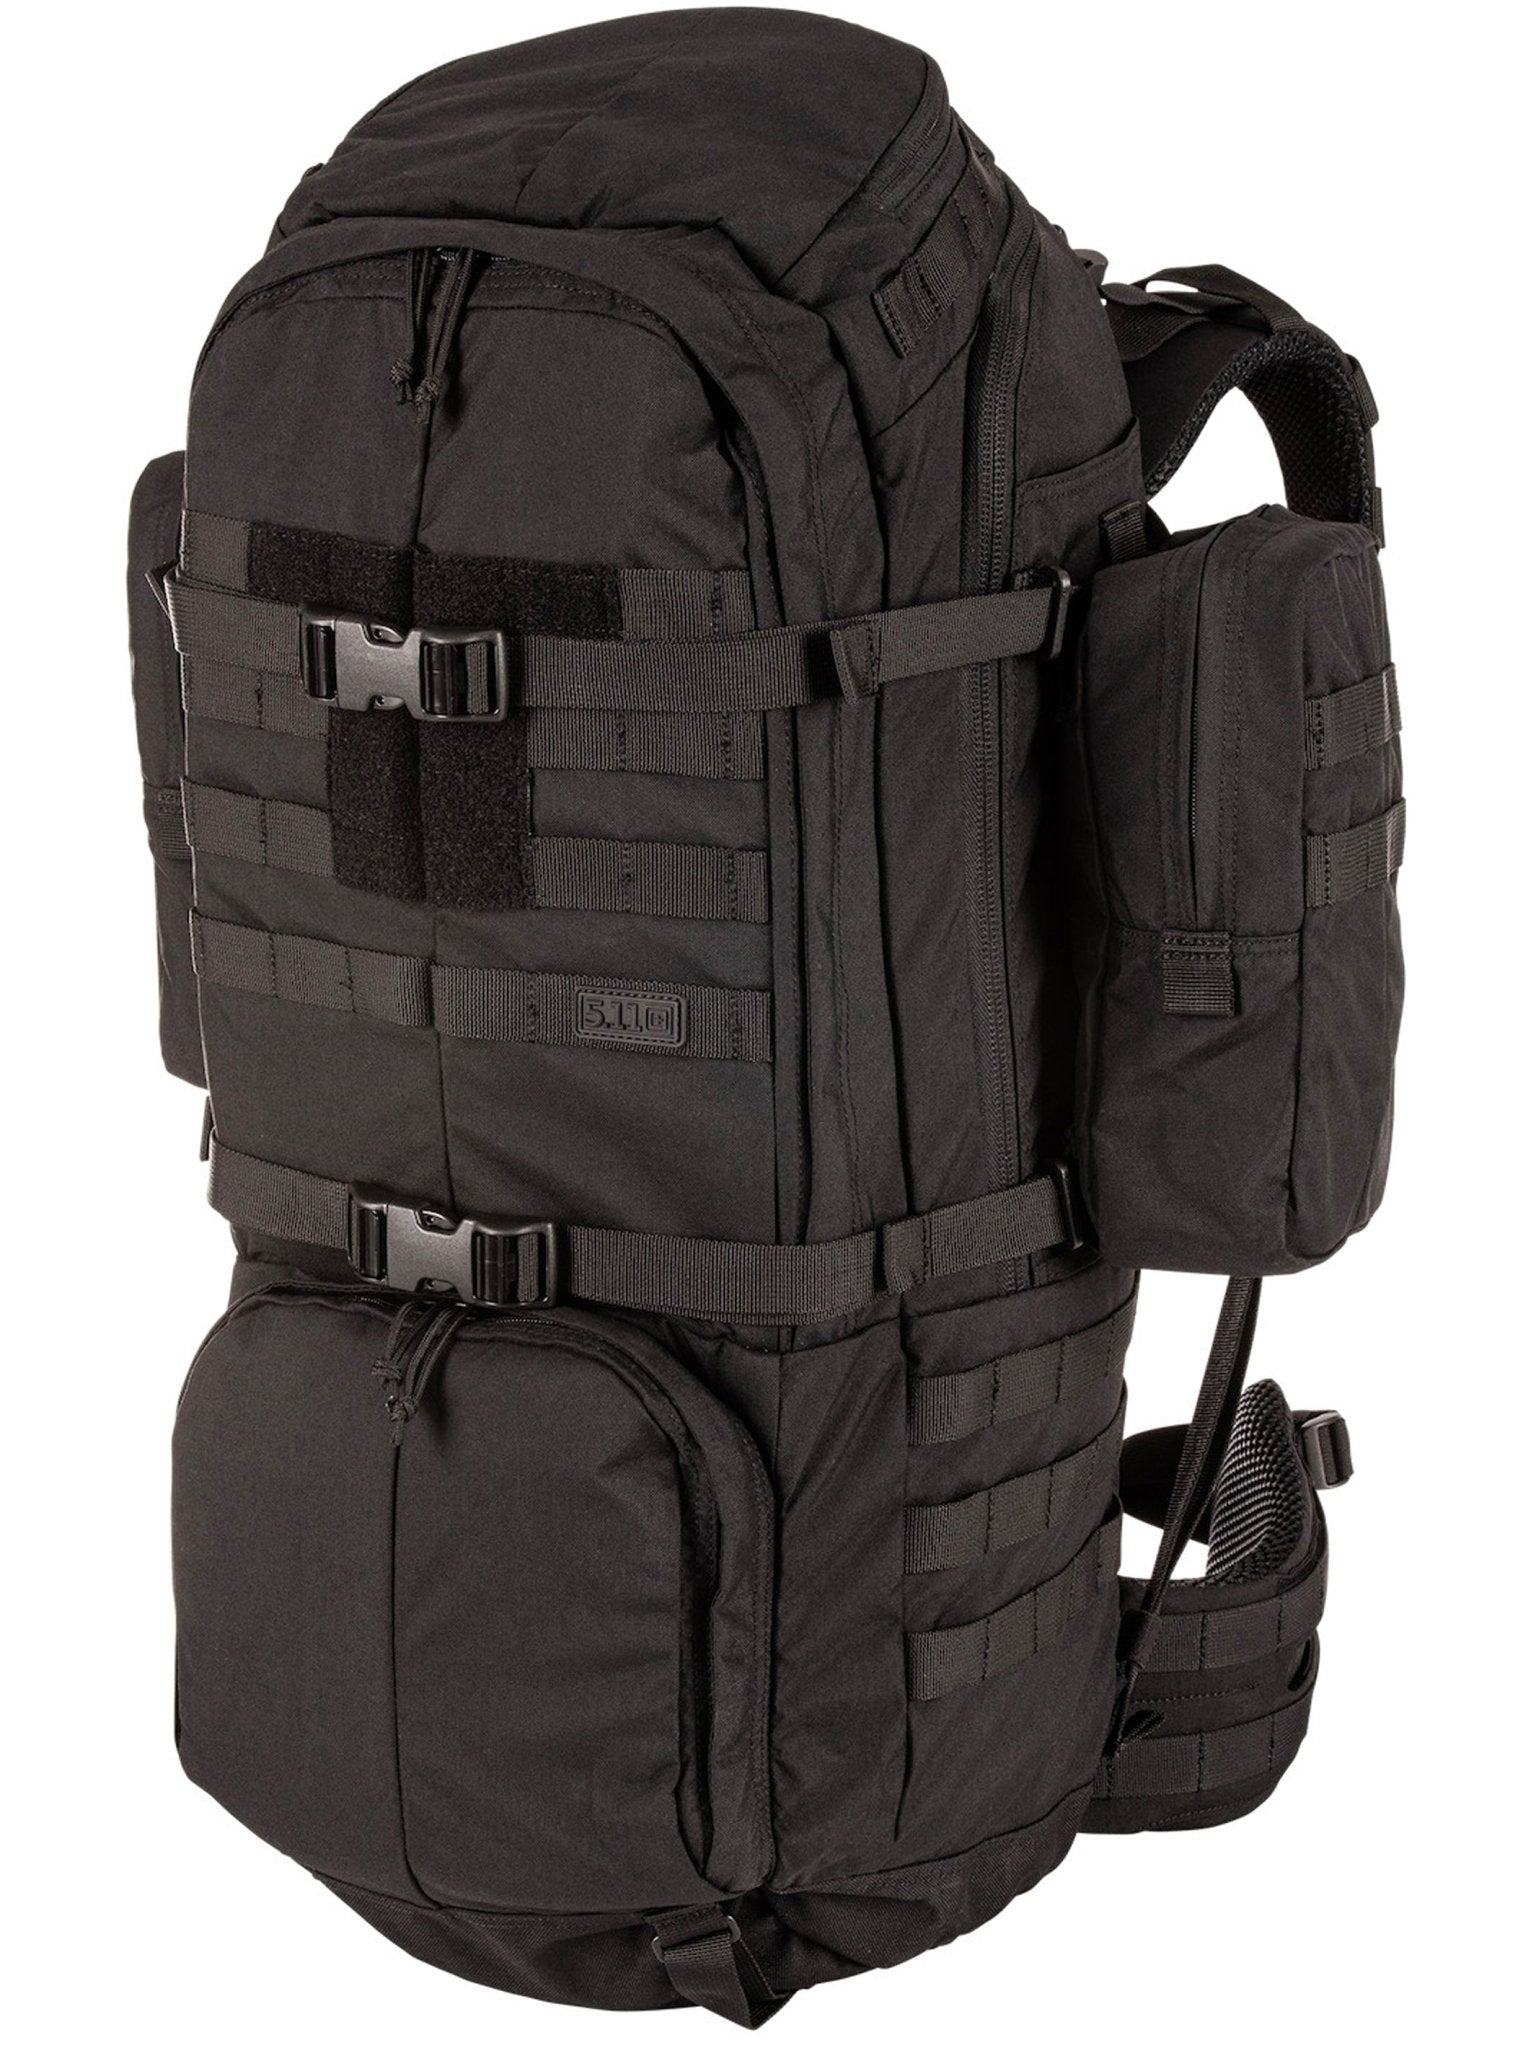 4elementsclothing5.11 Tactical5.11 Tactical - 5.11 Tactical Rush 100 60L Backpack - Style 56555Bag56555-019